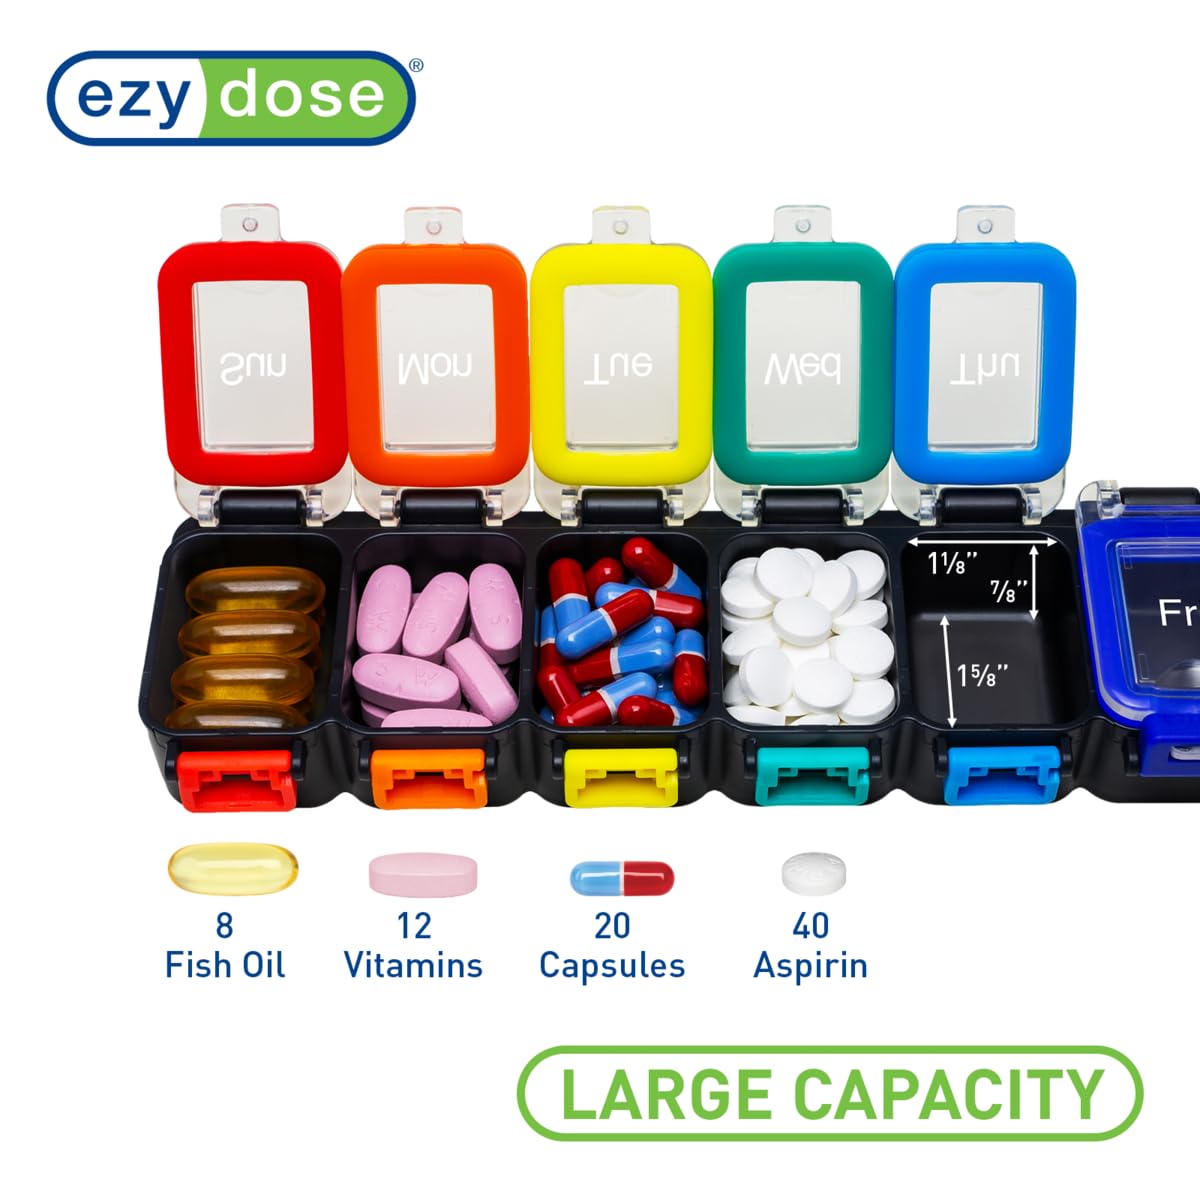 EZY DOSE Weekly (7-Day) Pill Planner, Medicine Case, Vitamin Organizer Box, Waterproof Locking Compartments to Secure Prescription Medication and Prevent Accidental Spilling, Rainbow